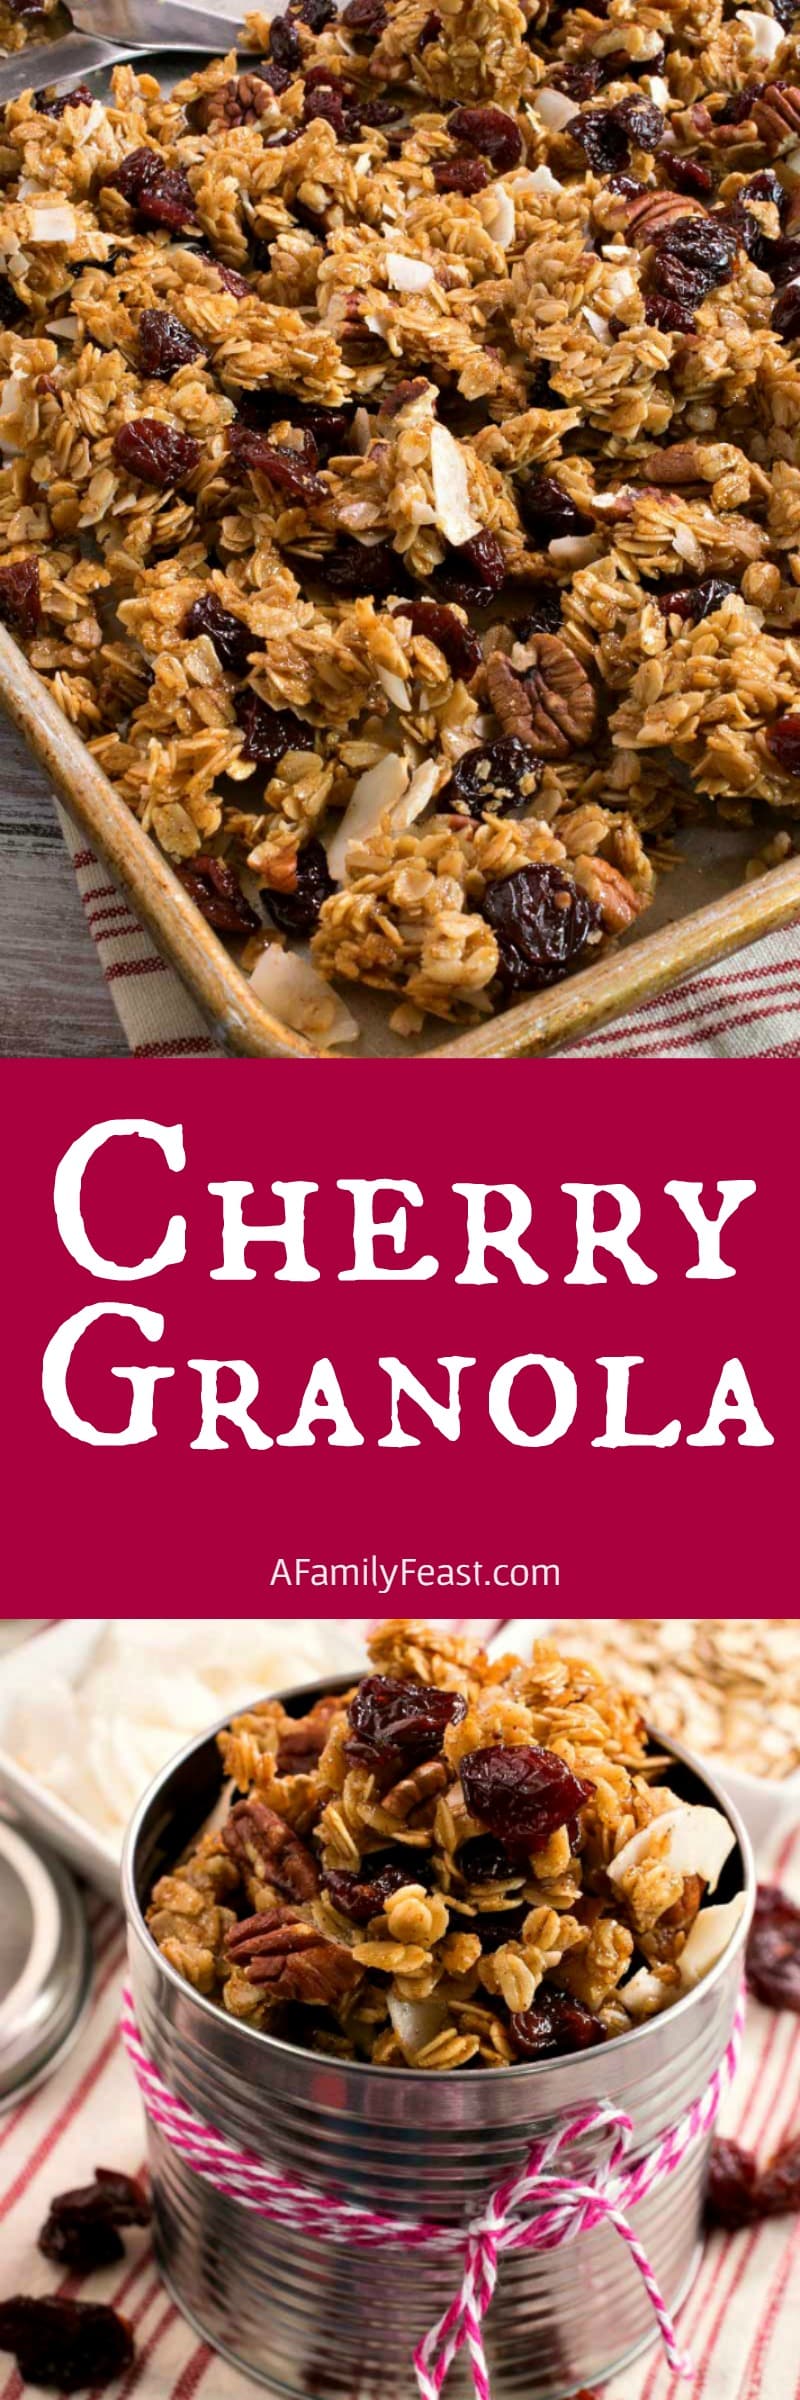 Cherry Granola - So easy to make at home. Loaded with oats, dried cherries, coconut, nuts and more!